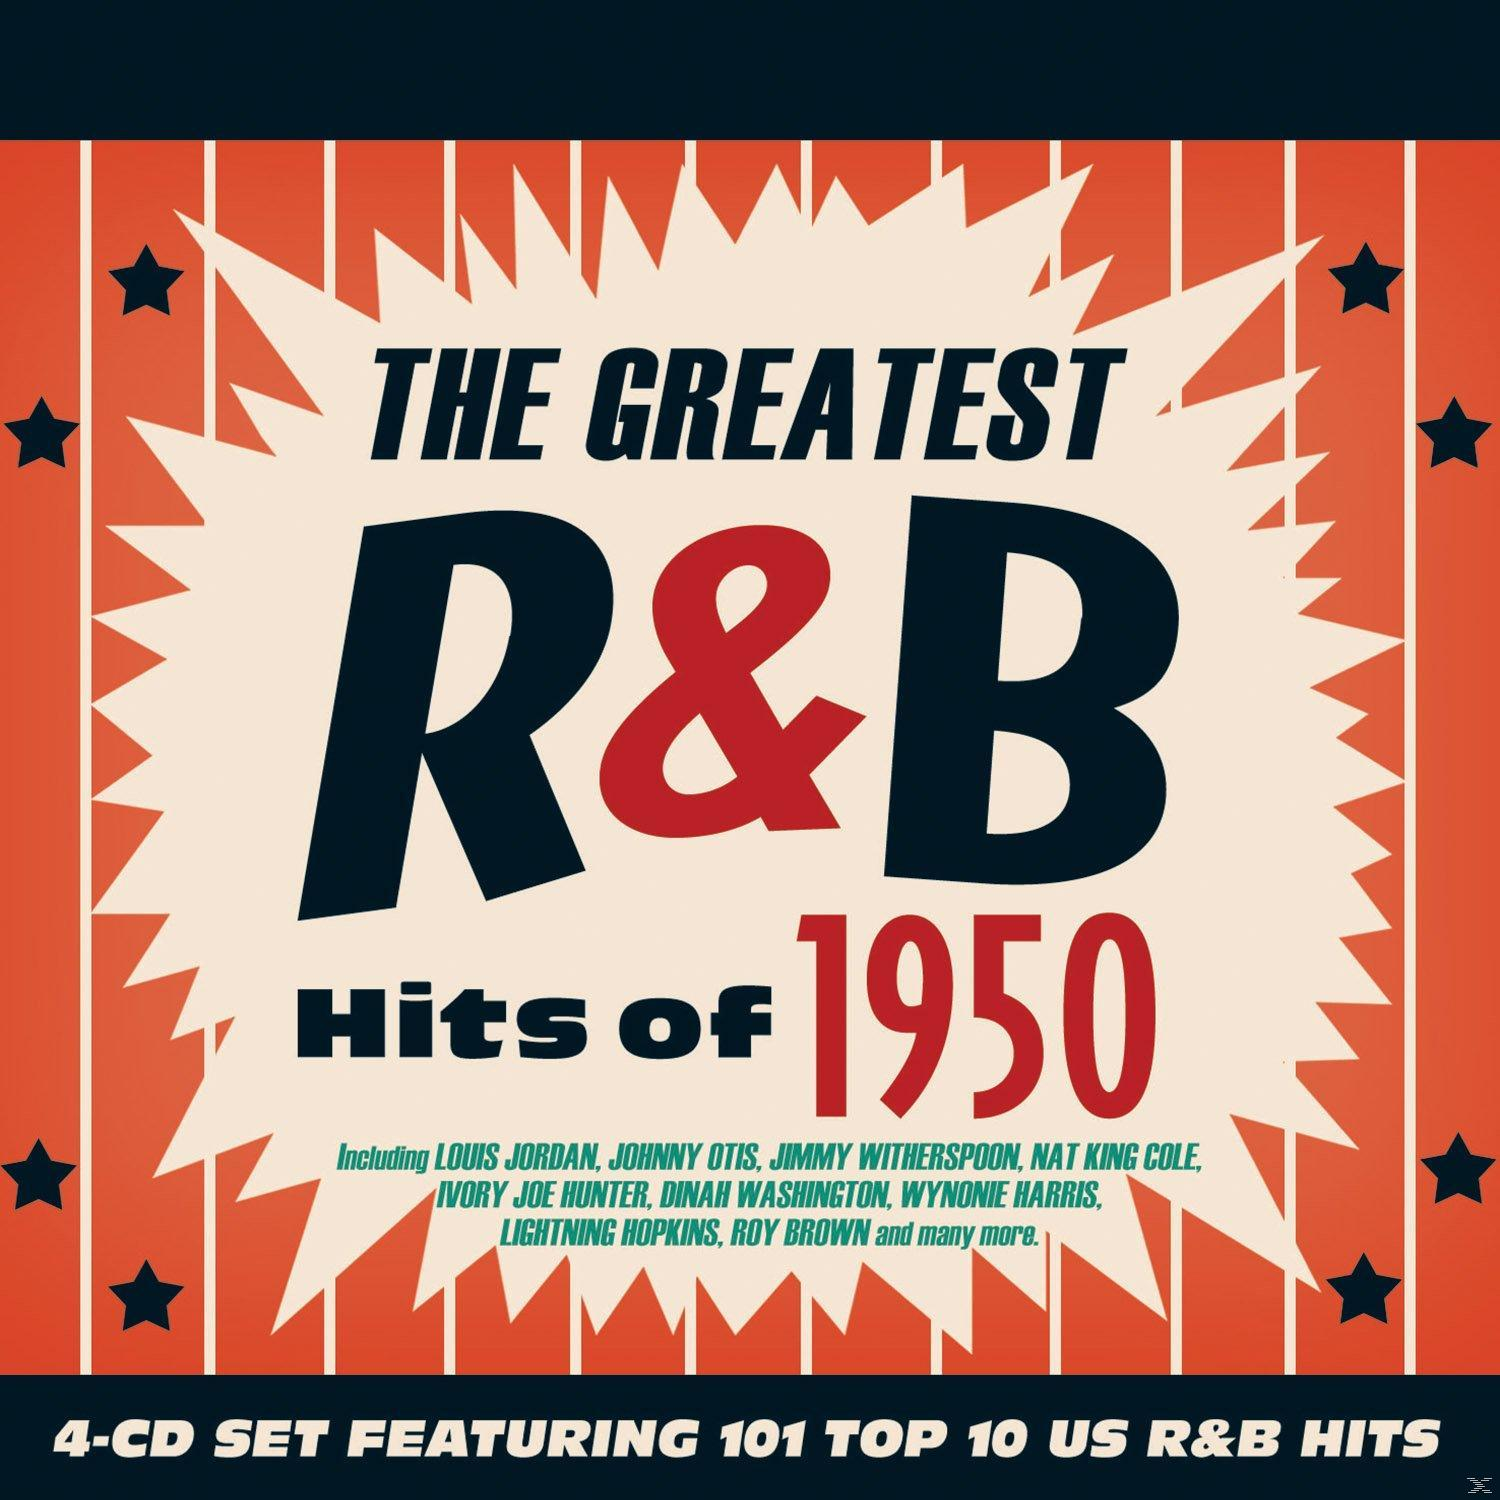 - The VARIOUS Greatest Of (CD) - 1950 R&B Hits